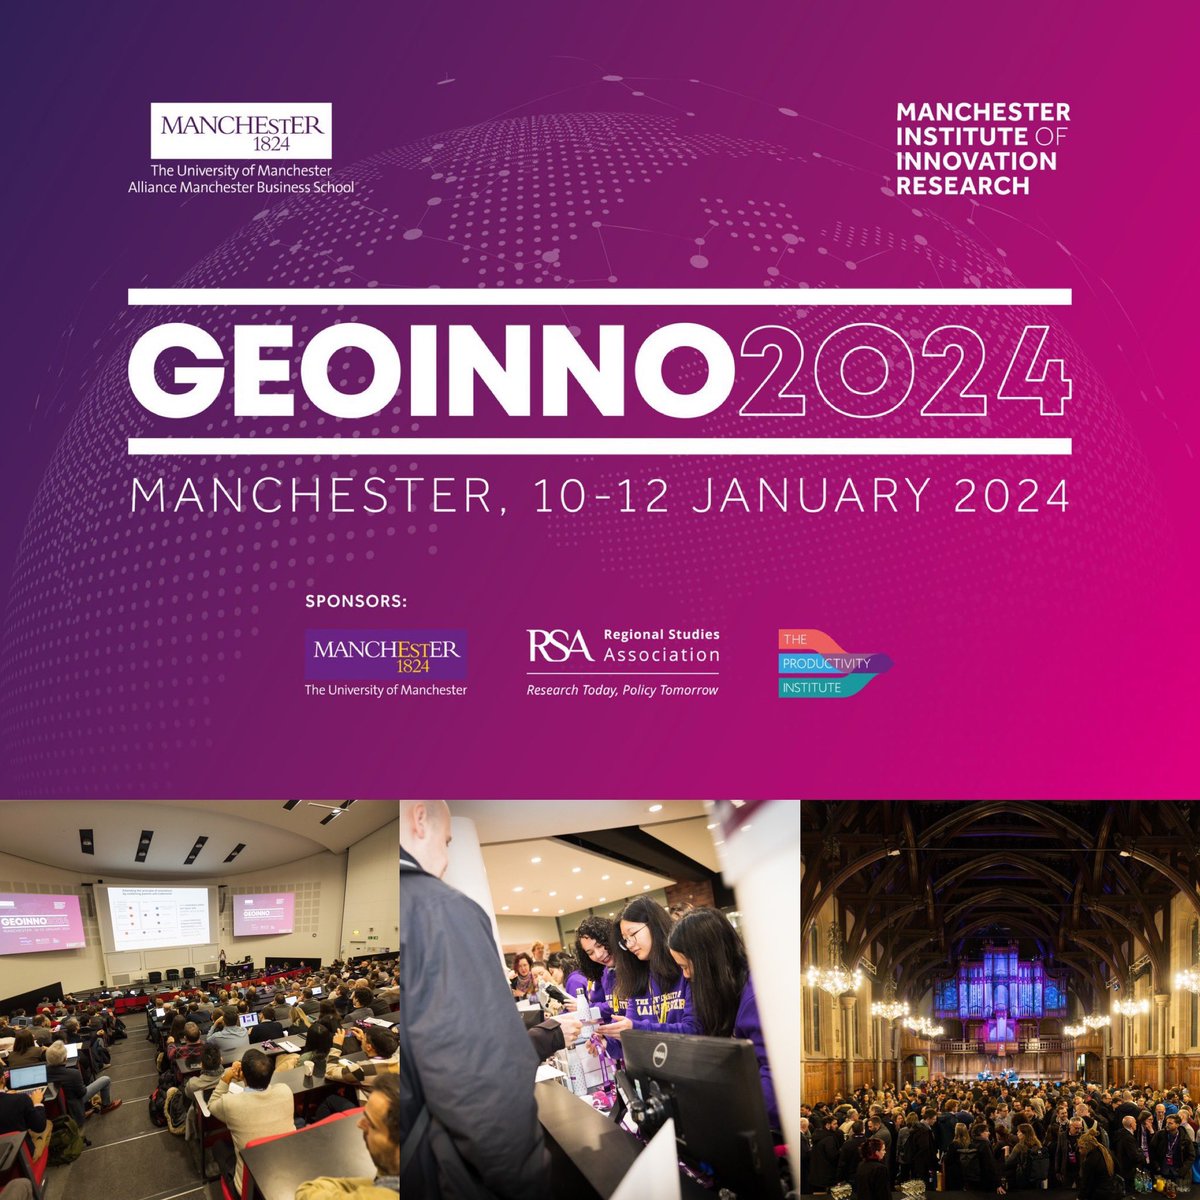 Wrapping up #GeoInno2024! 🌍 Last week, we hosted almost 500 delegates from 33 countries at @OfficialUoM for The 7th Geography of Innovation Conference. Grateful to everyone who contributed to the event’s success! 👏 Read more: alliancembs.manchester.ac.uk/news/mioir-wel…